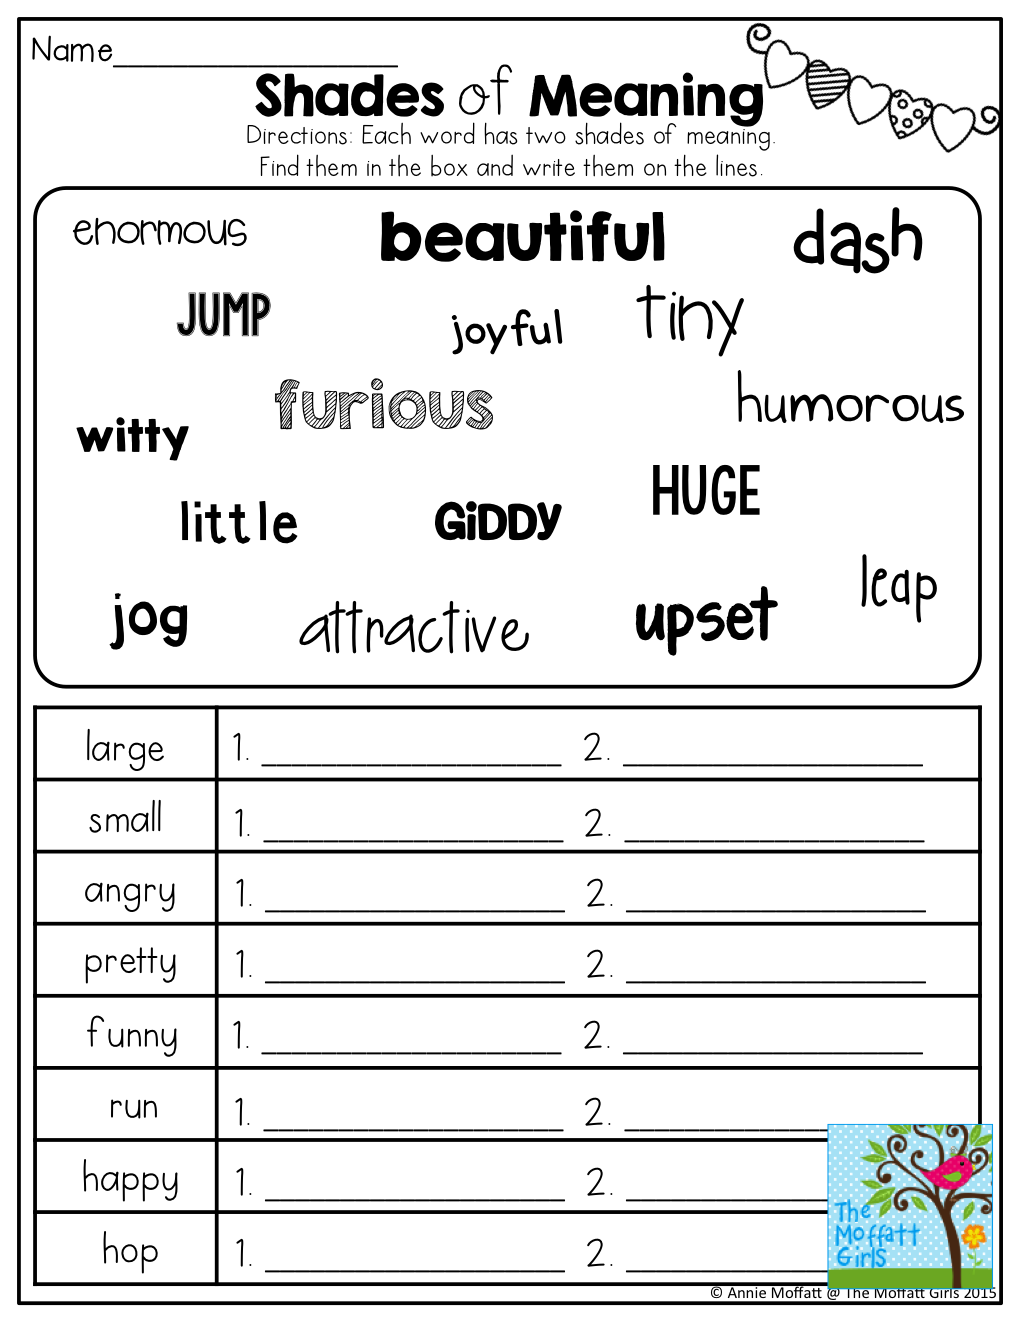 Shades Of Meaning! Tons Of Other Great Printables!